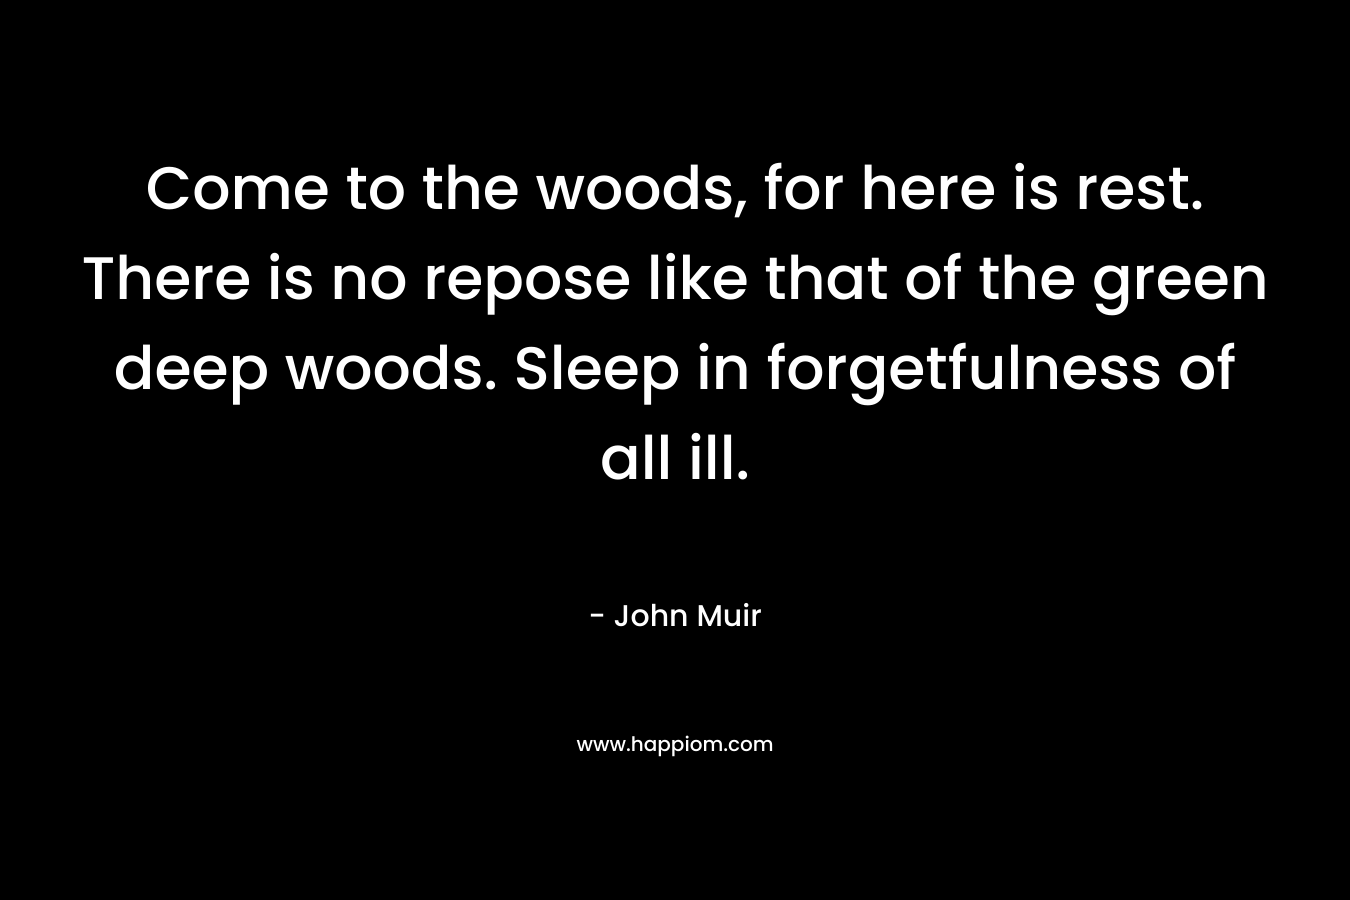 Come to the woods, for here is rest. There is no repose like that of the green deep woods. Sleep in forgetfulness of all ill.